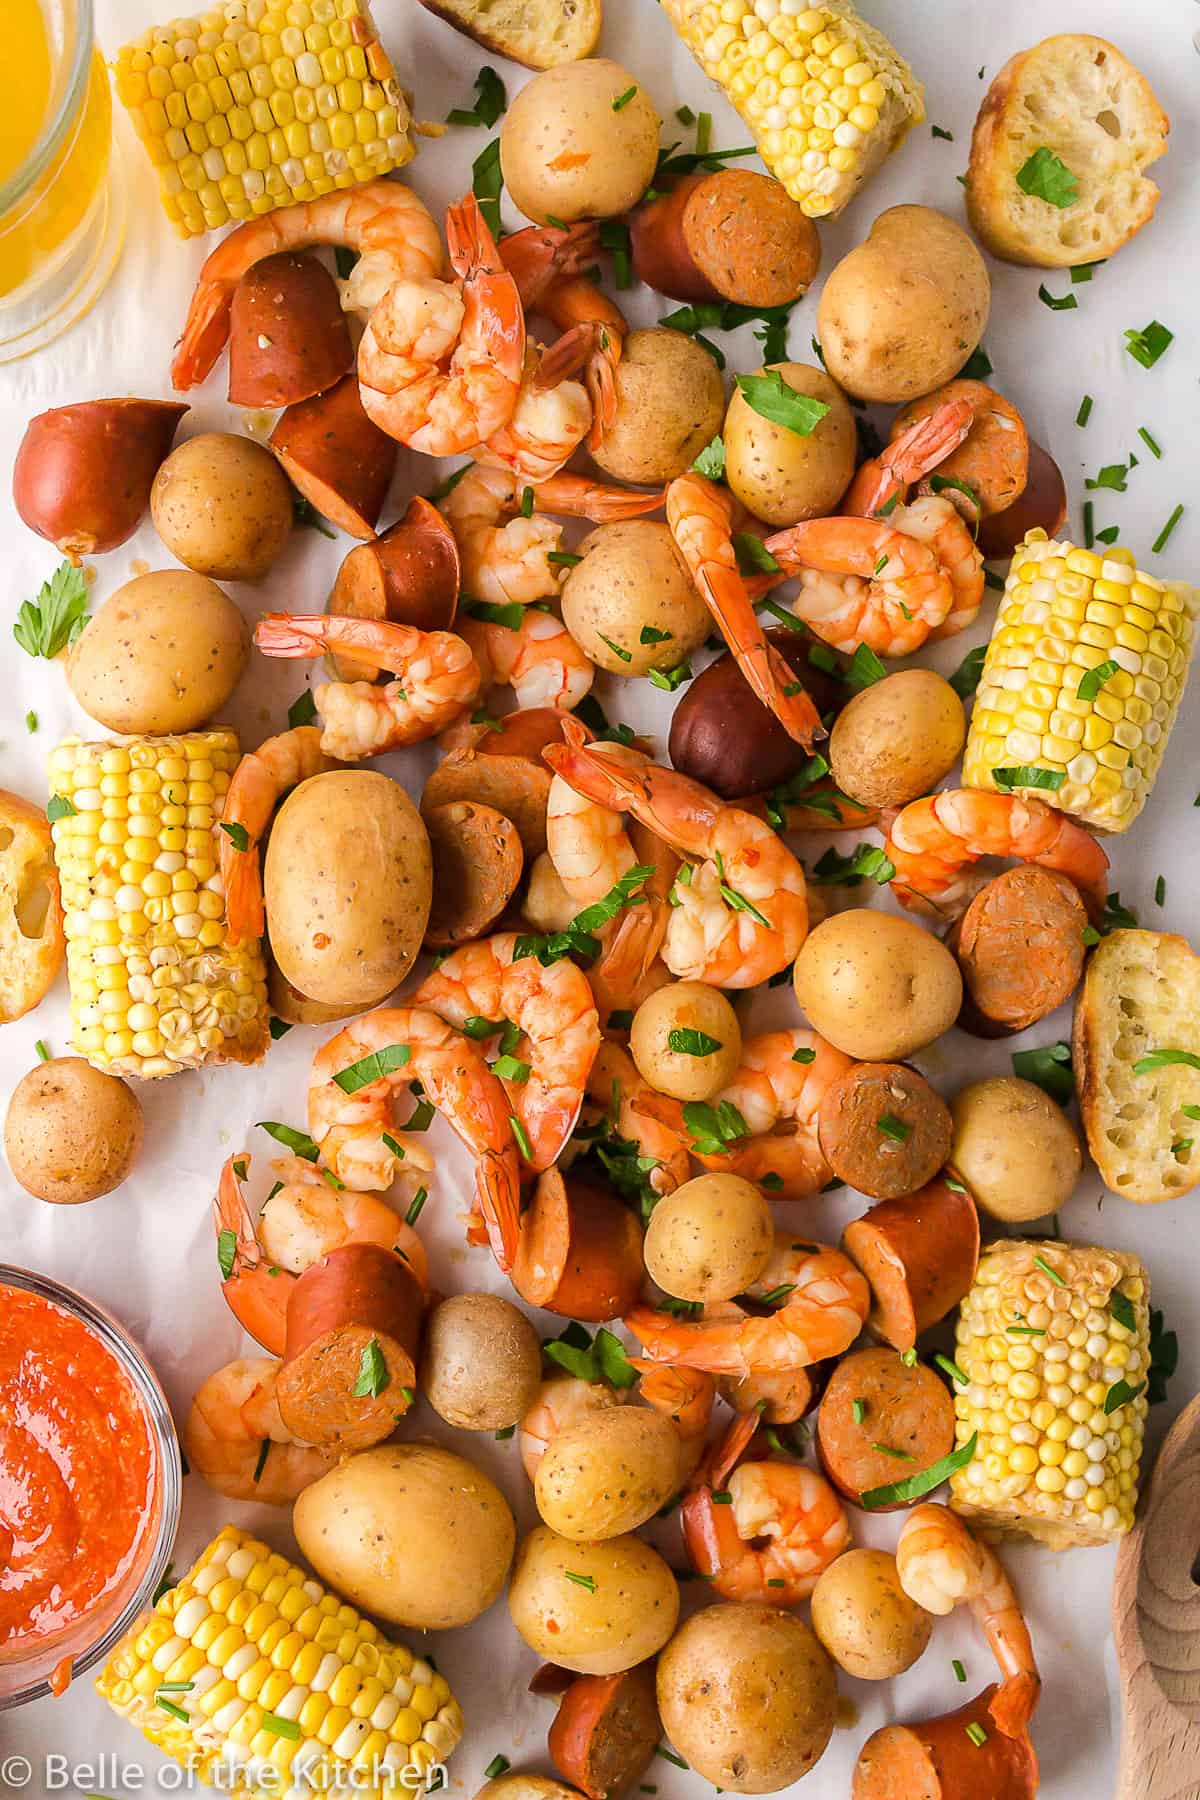 shrimp, corn, potatoes and sausage spread on a table next to a bowl of cocktail sauce.